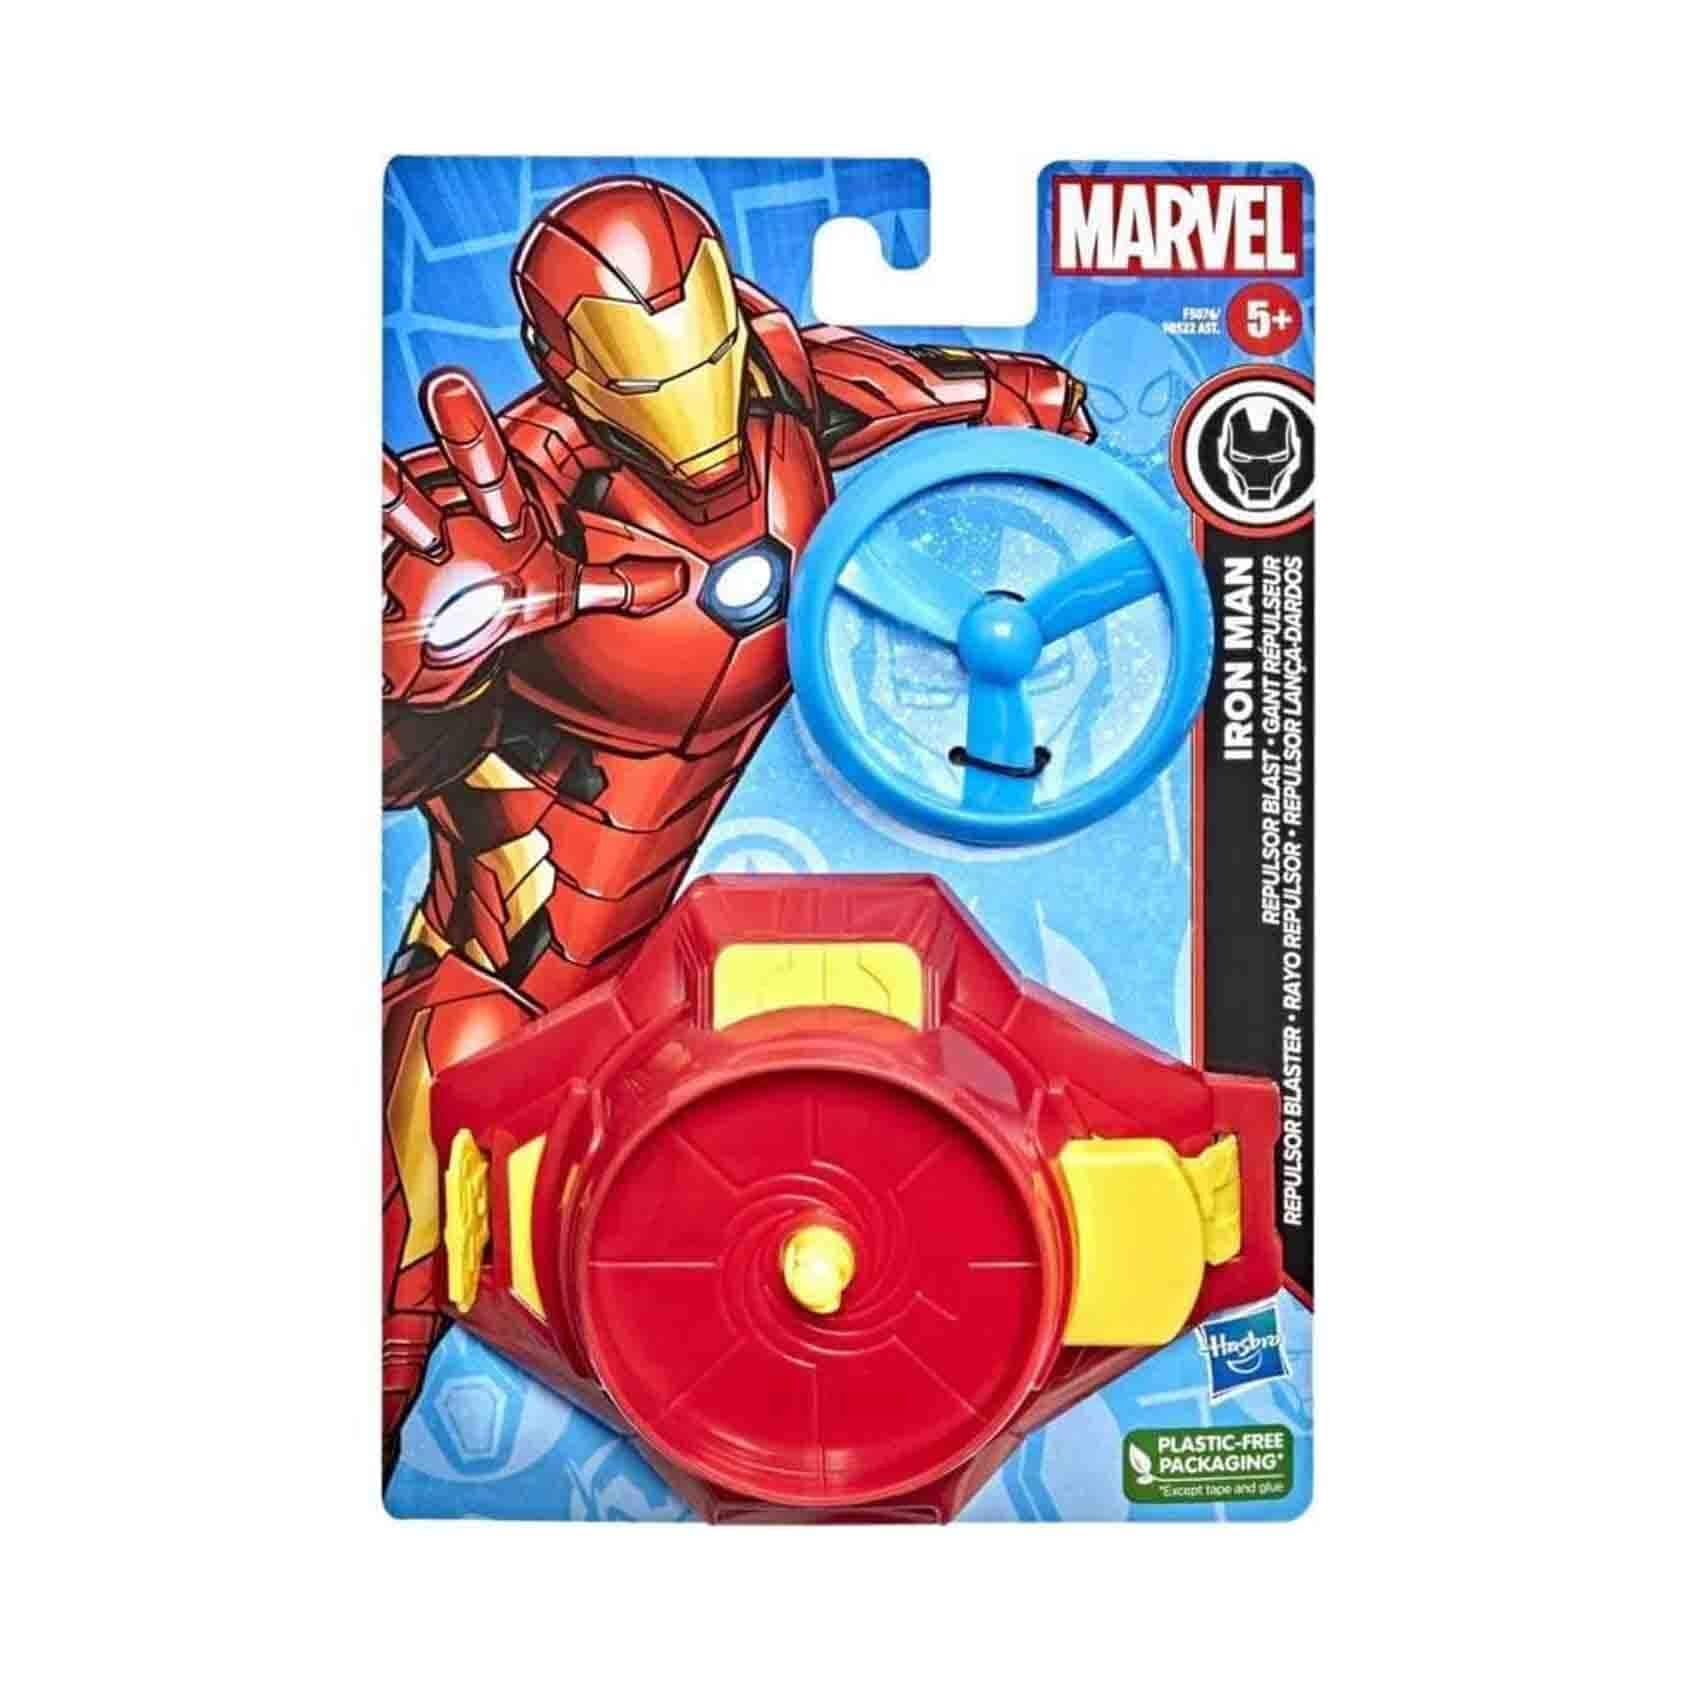 Buy Action Figures & Playsets Online - Shop on Carrefour Qatar